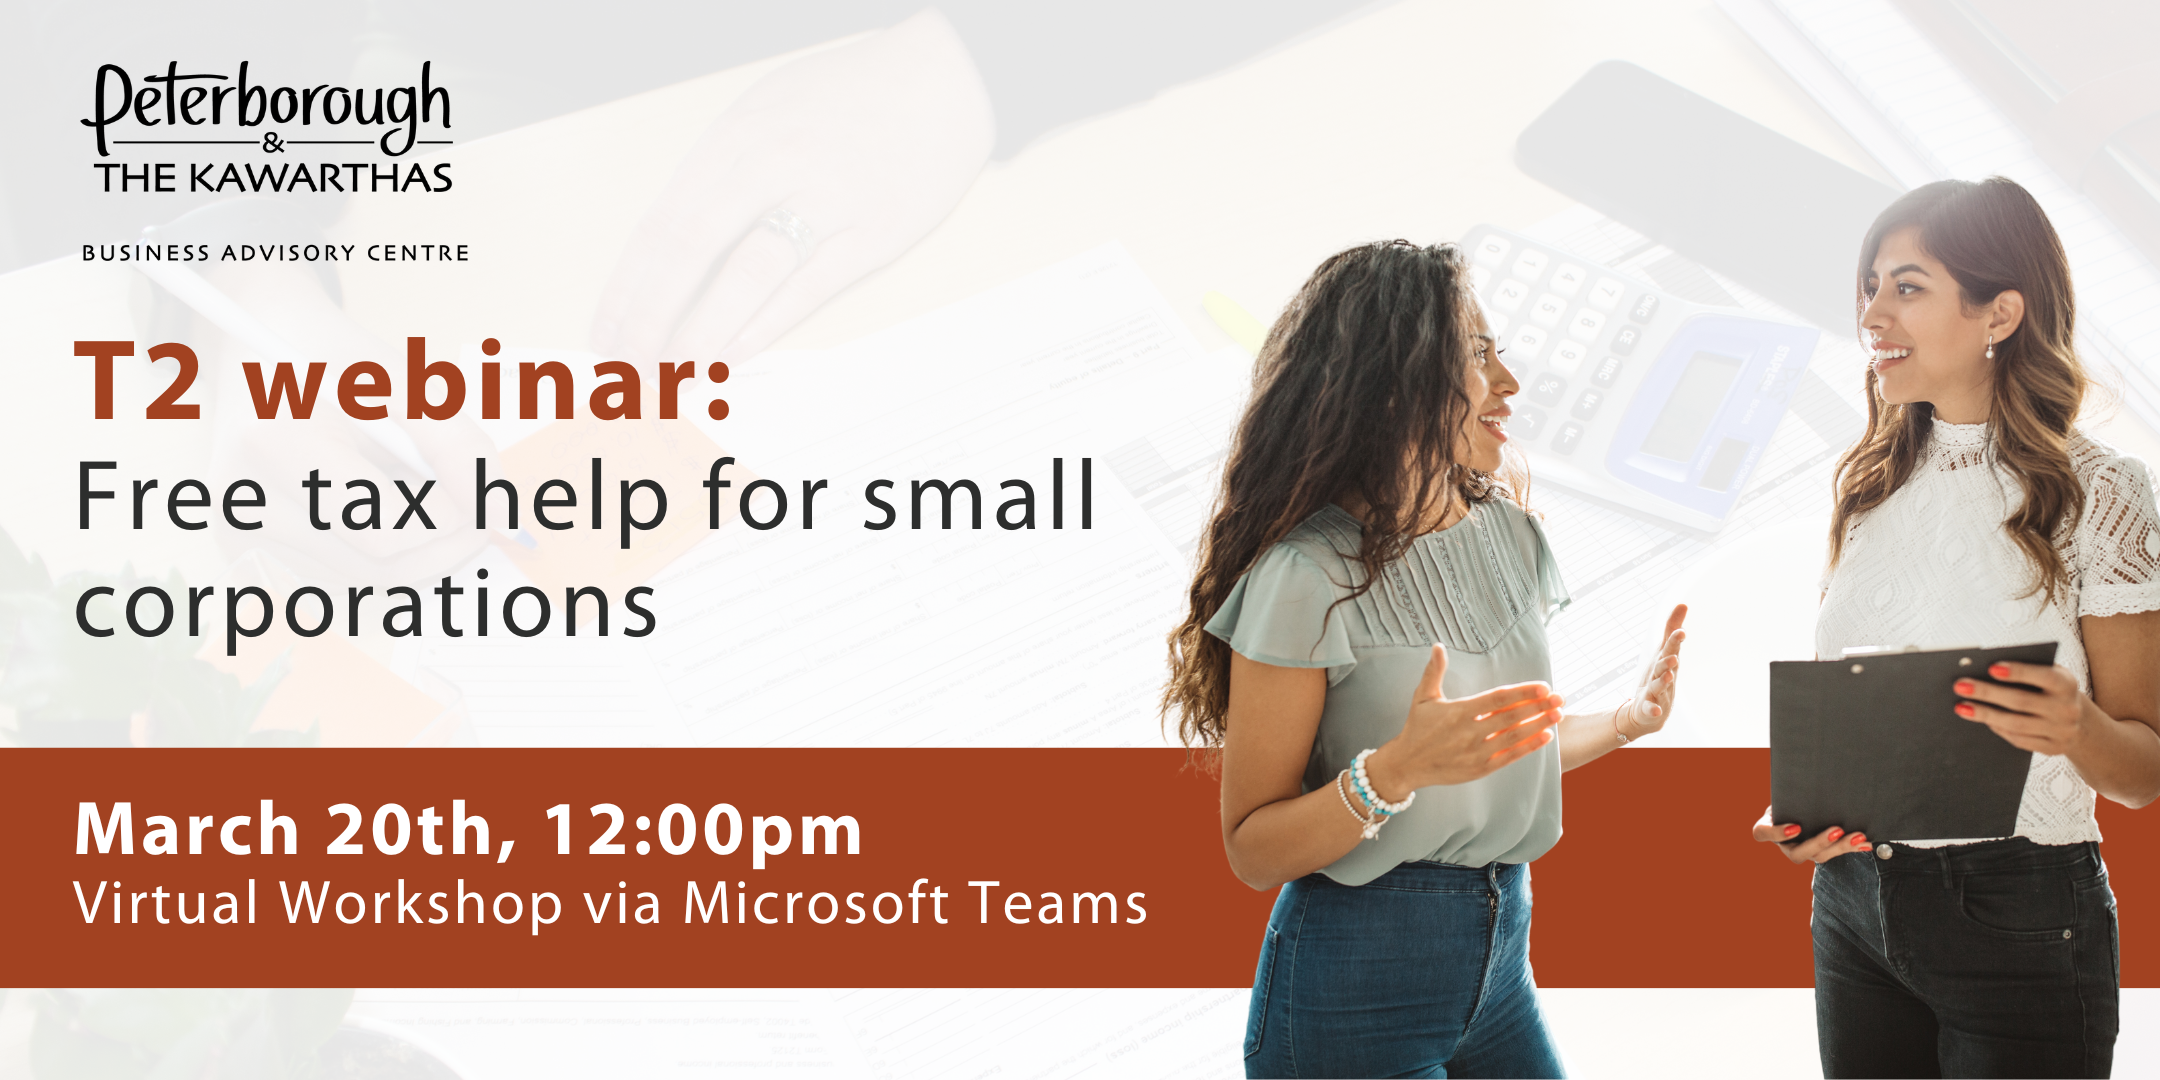 Graphic for event. Two women looking at a clipboard and talking. Text reads: T2 webinar: free tax help for small corporations. March 20th, 12:00pm, virtual workshop via Microsoft Teams